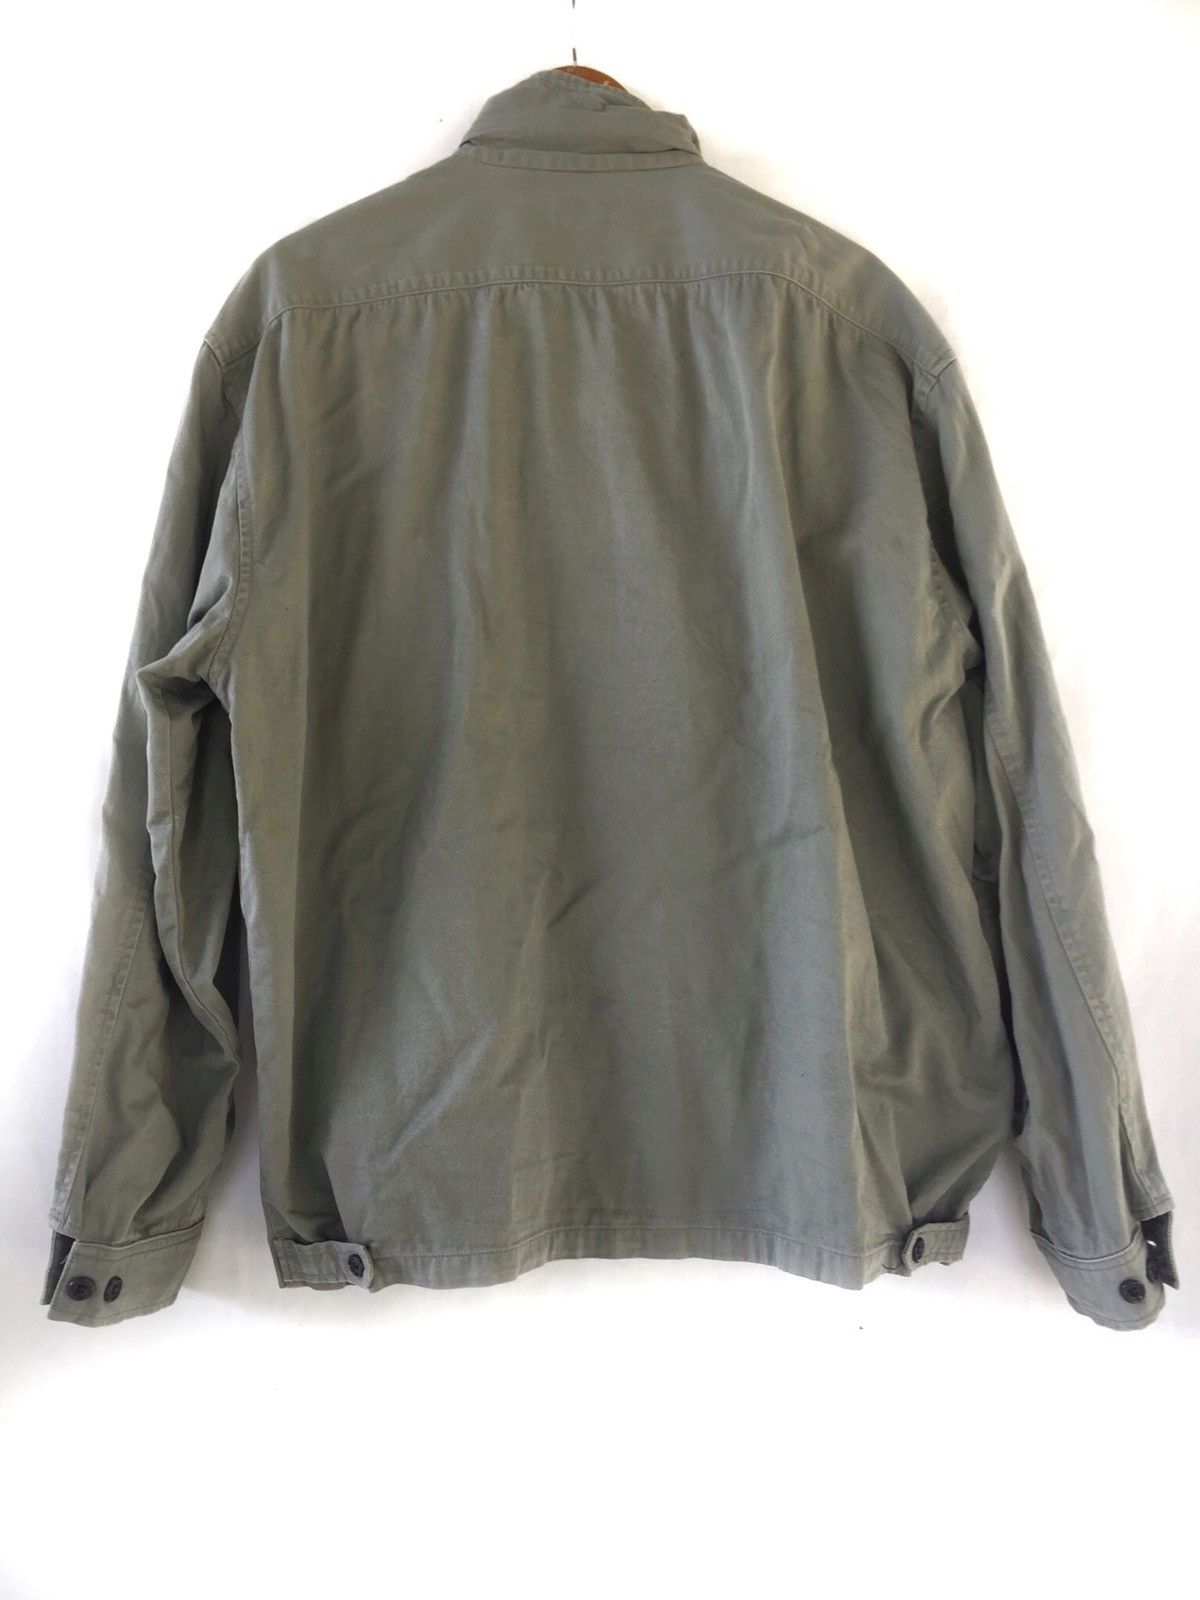 Stussy Vintage Stussy Zipper Jacket//American Streetwear Brand//Made in USA Size US L / EU 52-54 / 3 - 2 Preview